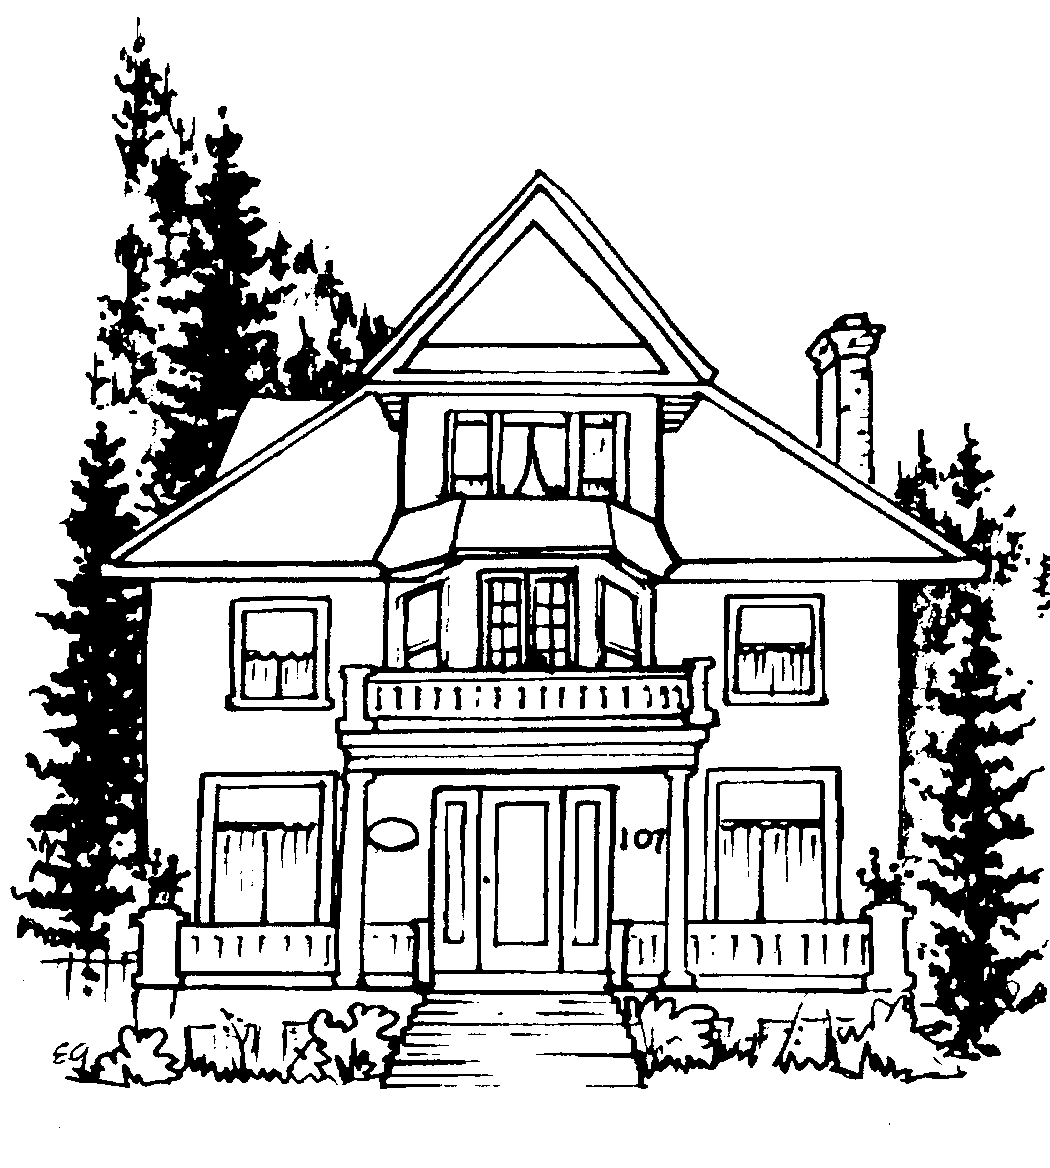 The beale bed breakfast. House clipart mid century